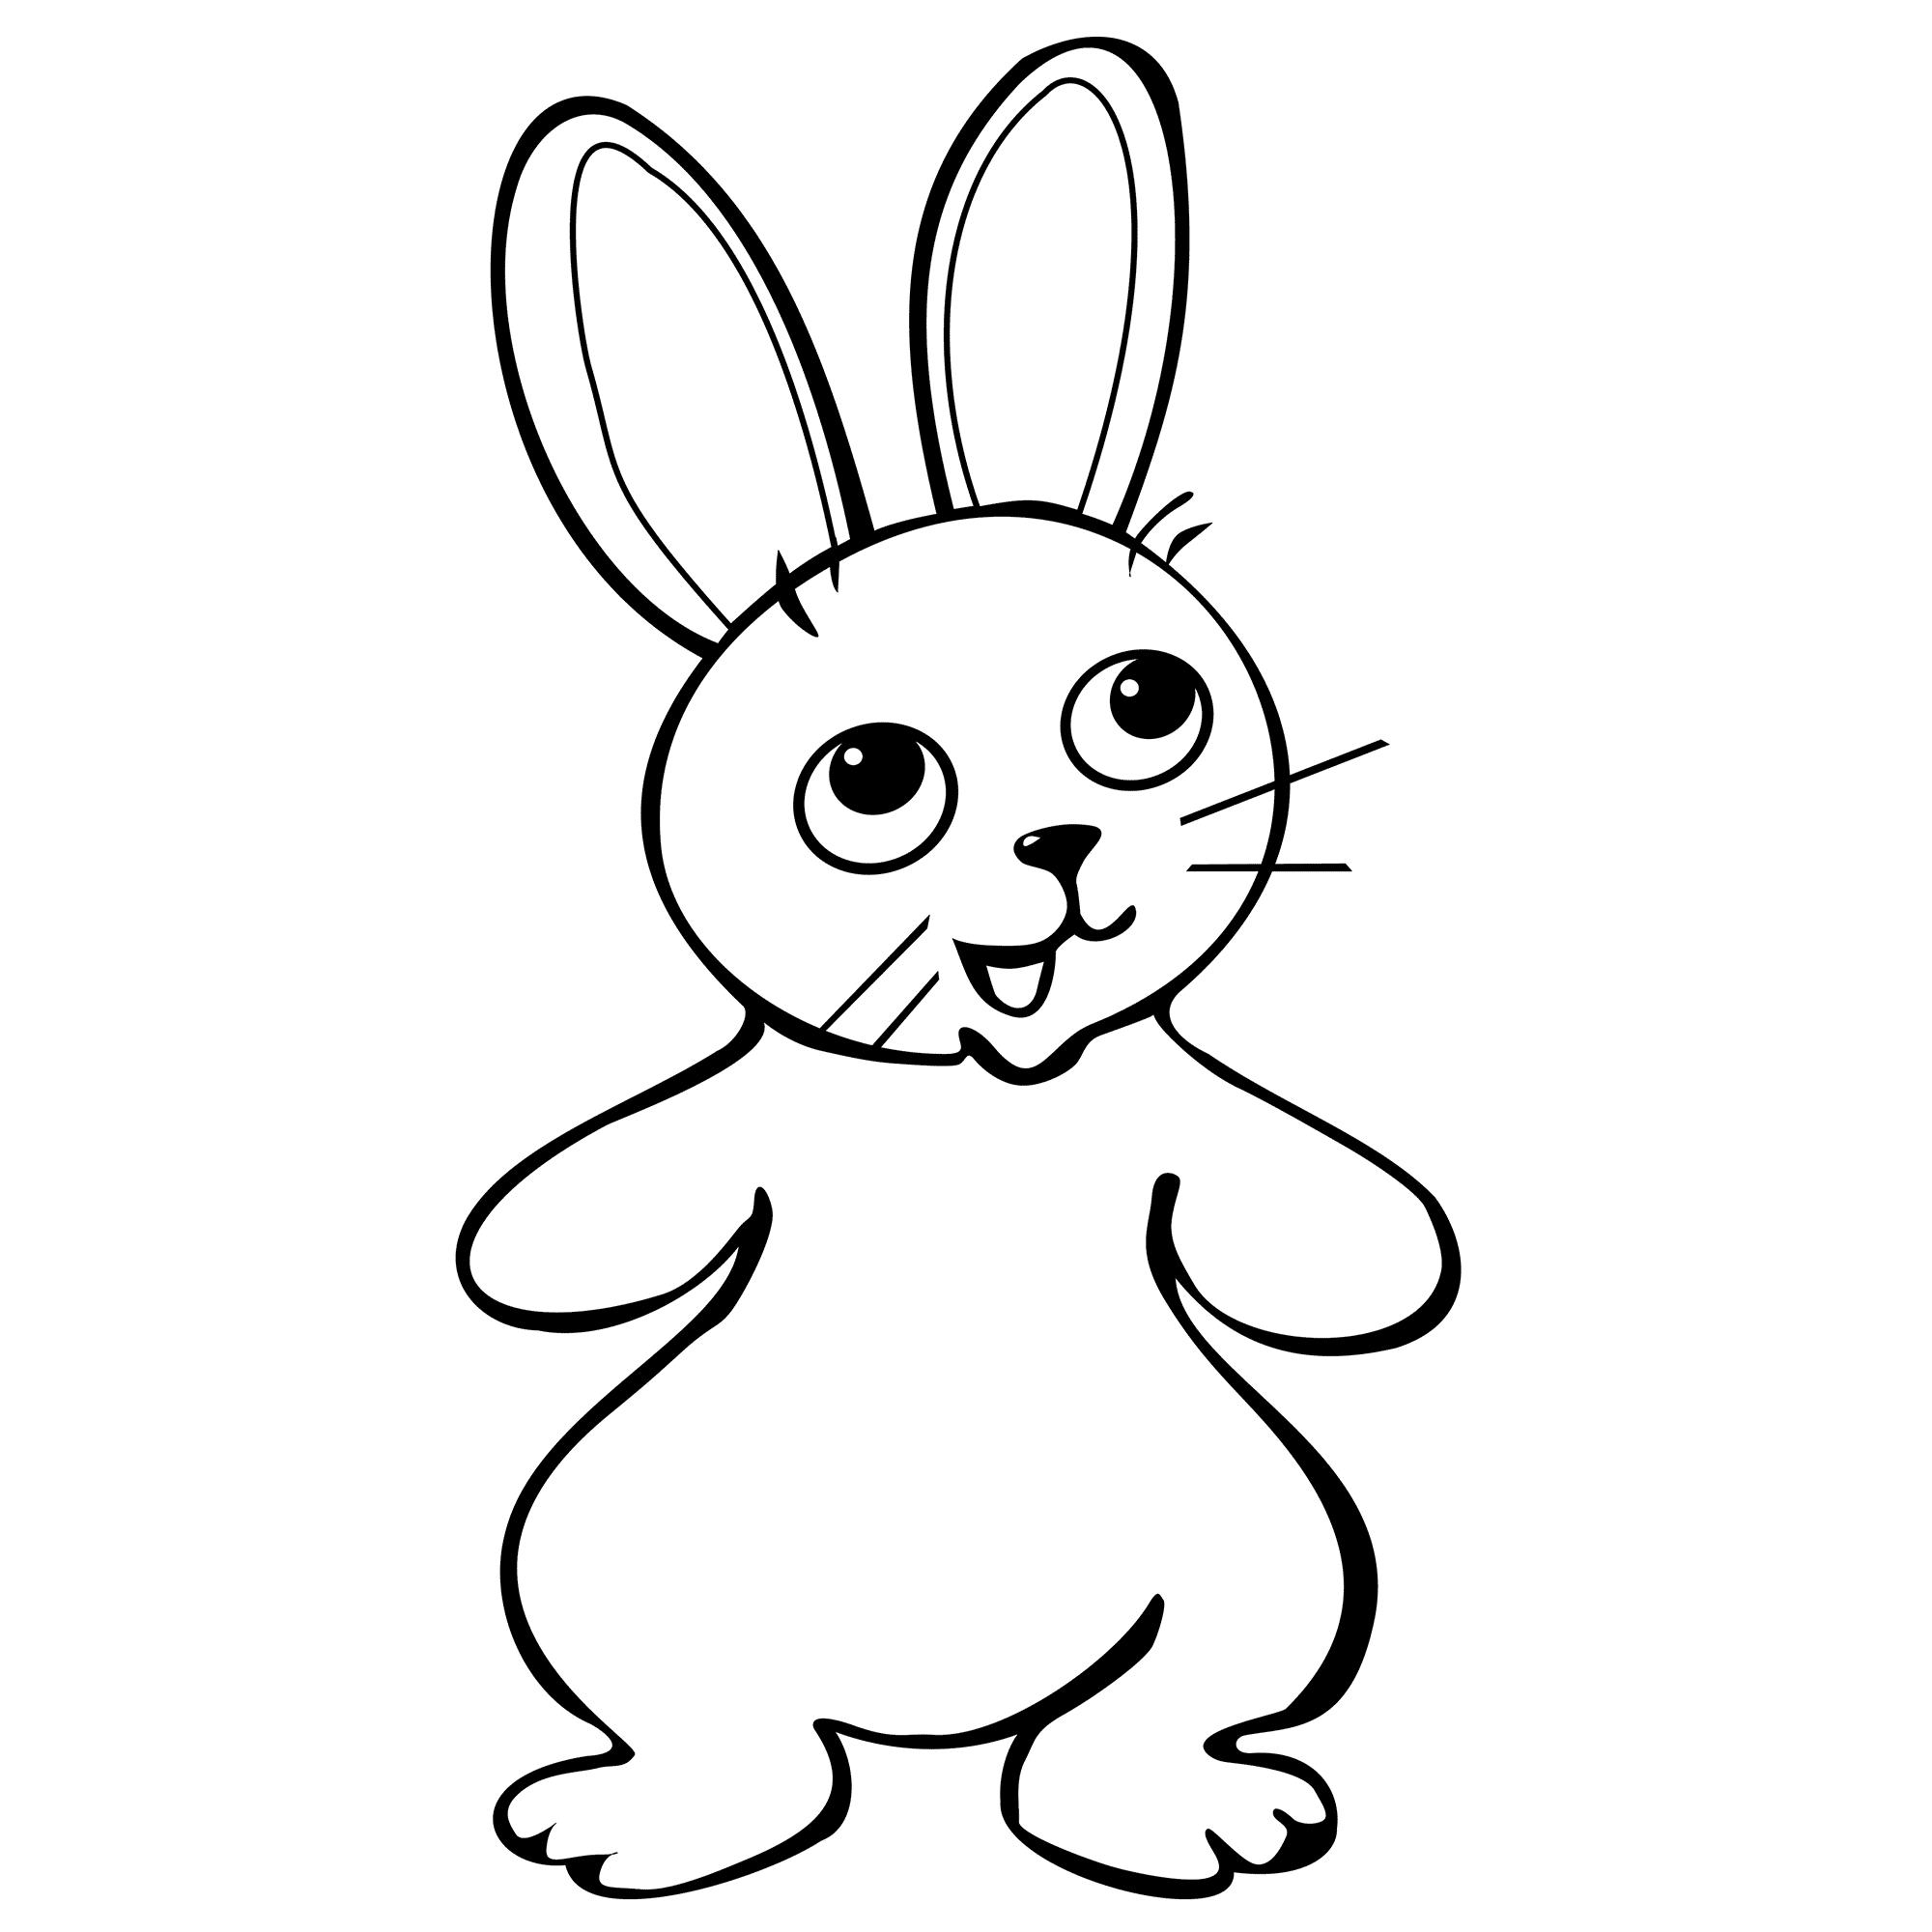 19+ Bunny Coloring Pages